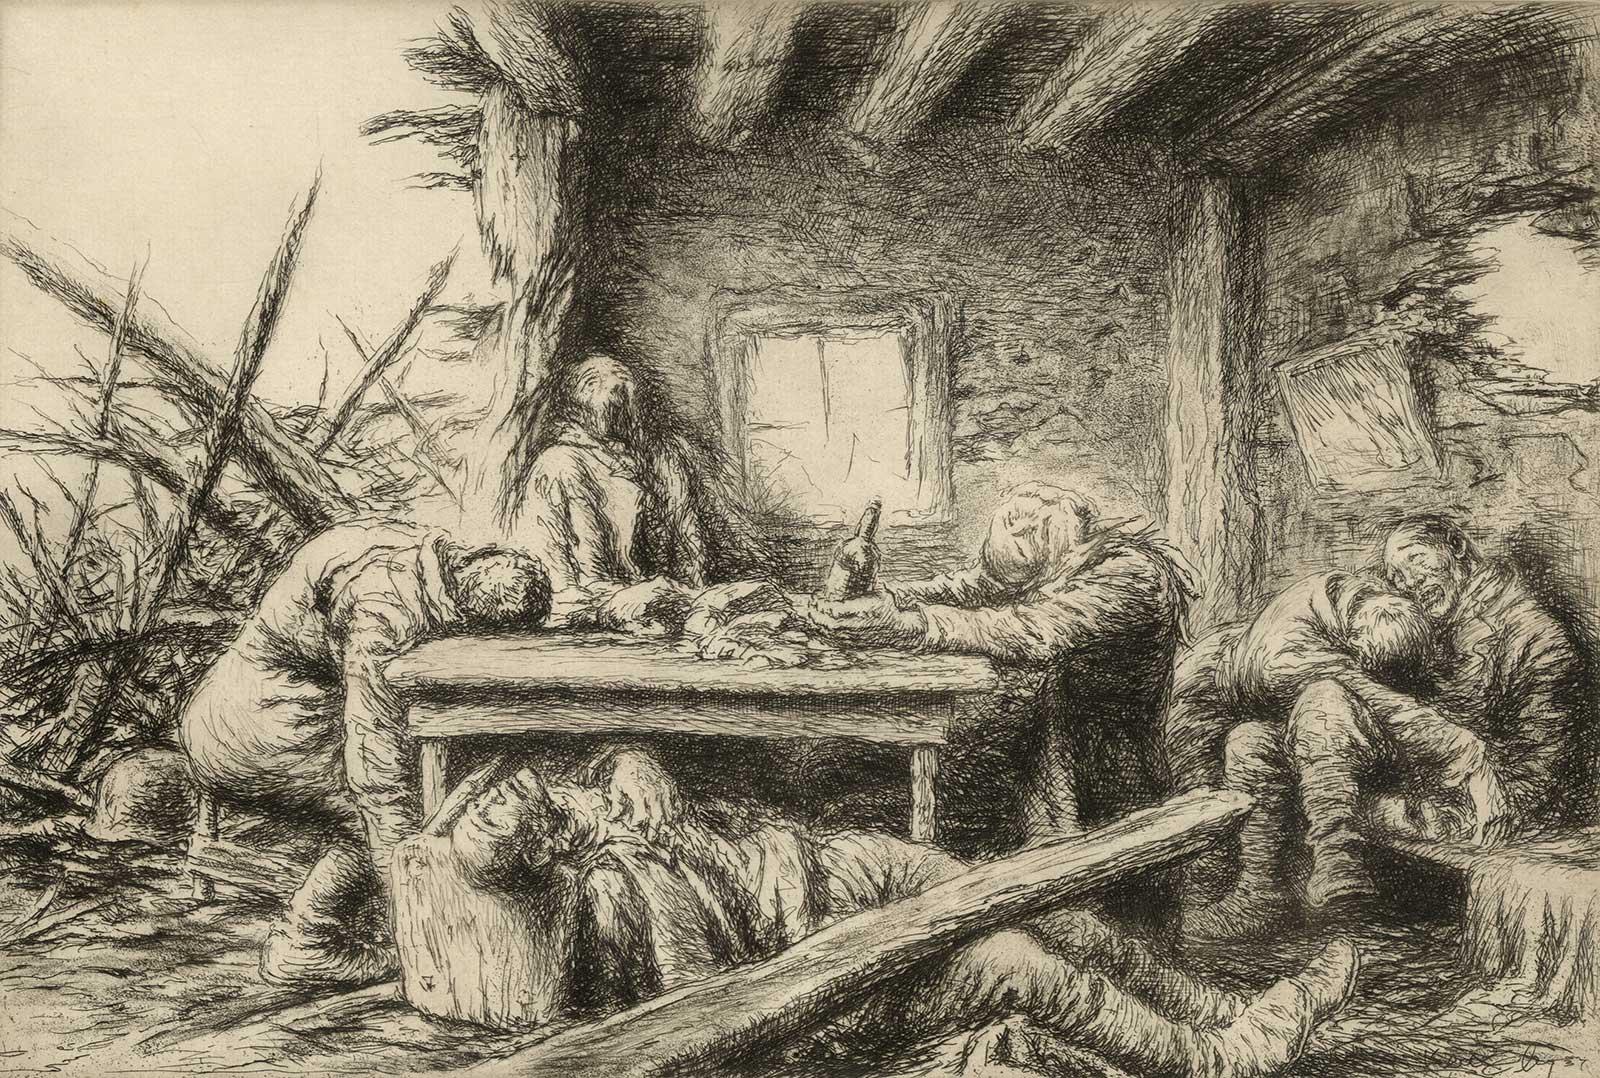 Kerr Eby Figurative Print - Th Last Supper (Macabre World War I image /dead soldiers in a bombed out house)